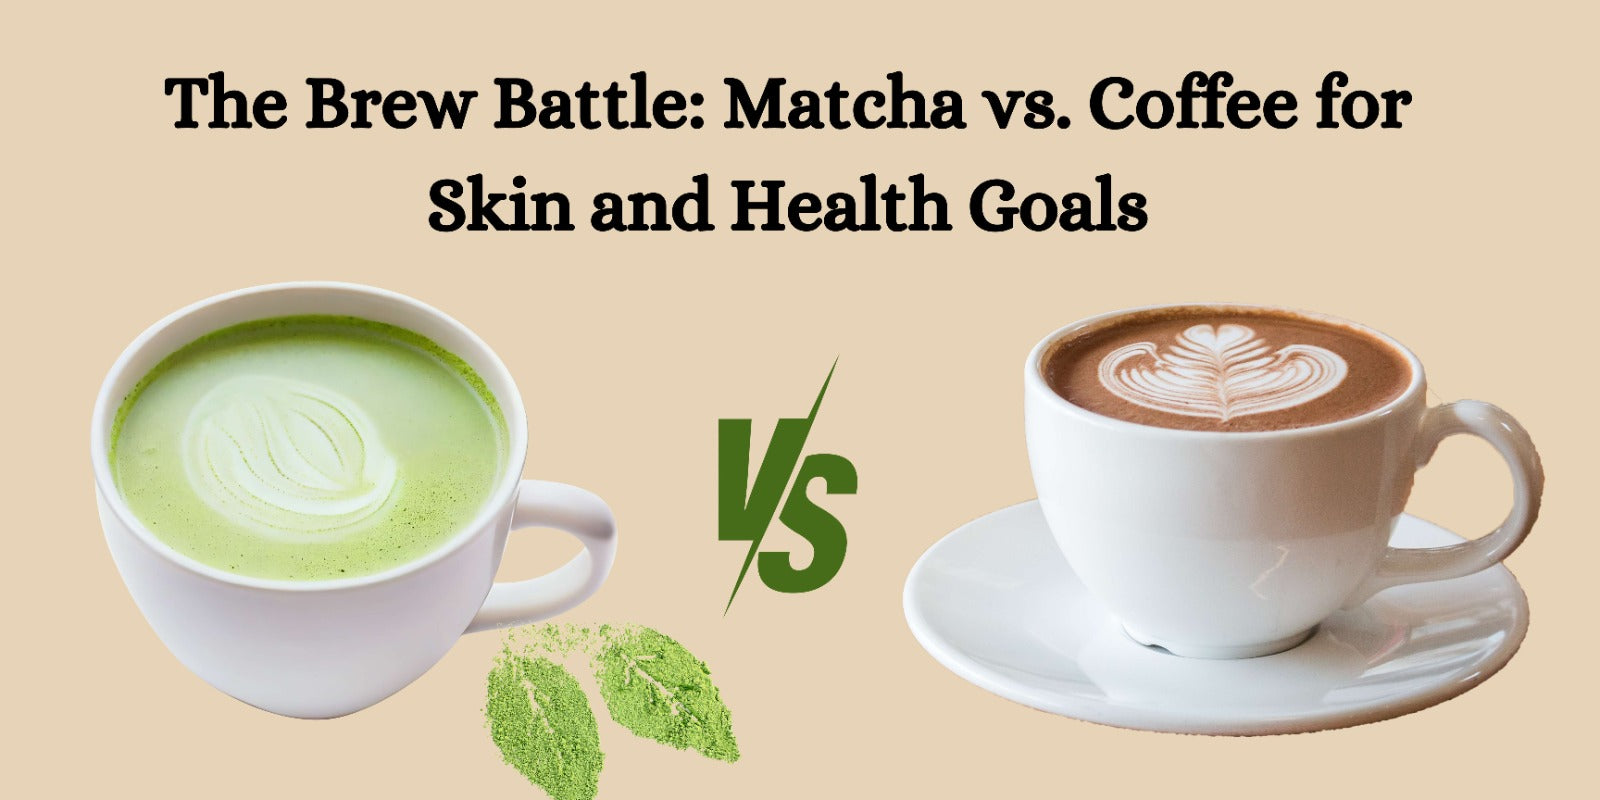 The Brew Battle: Matcha vs. Coffee for Skin and Health Goals